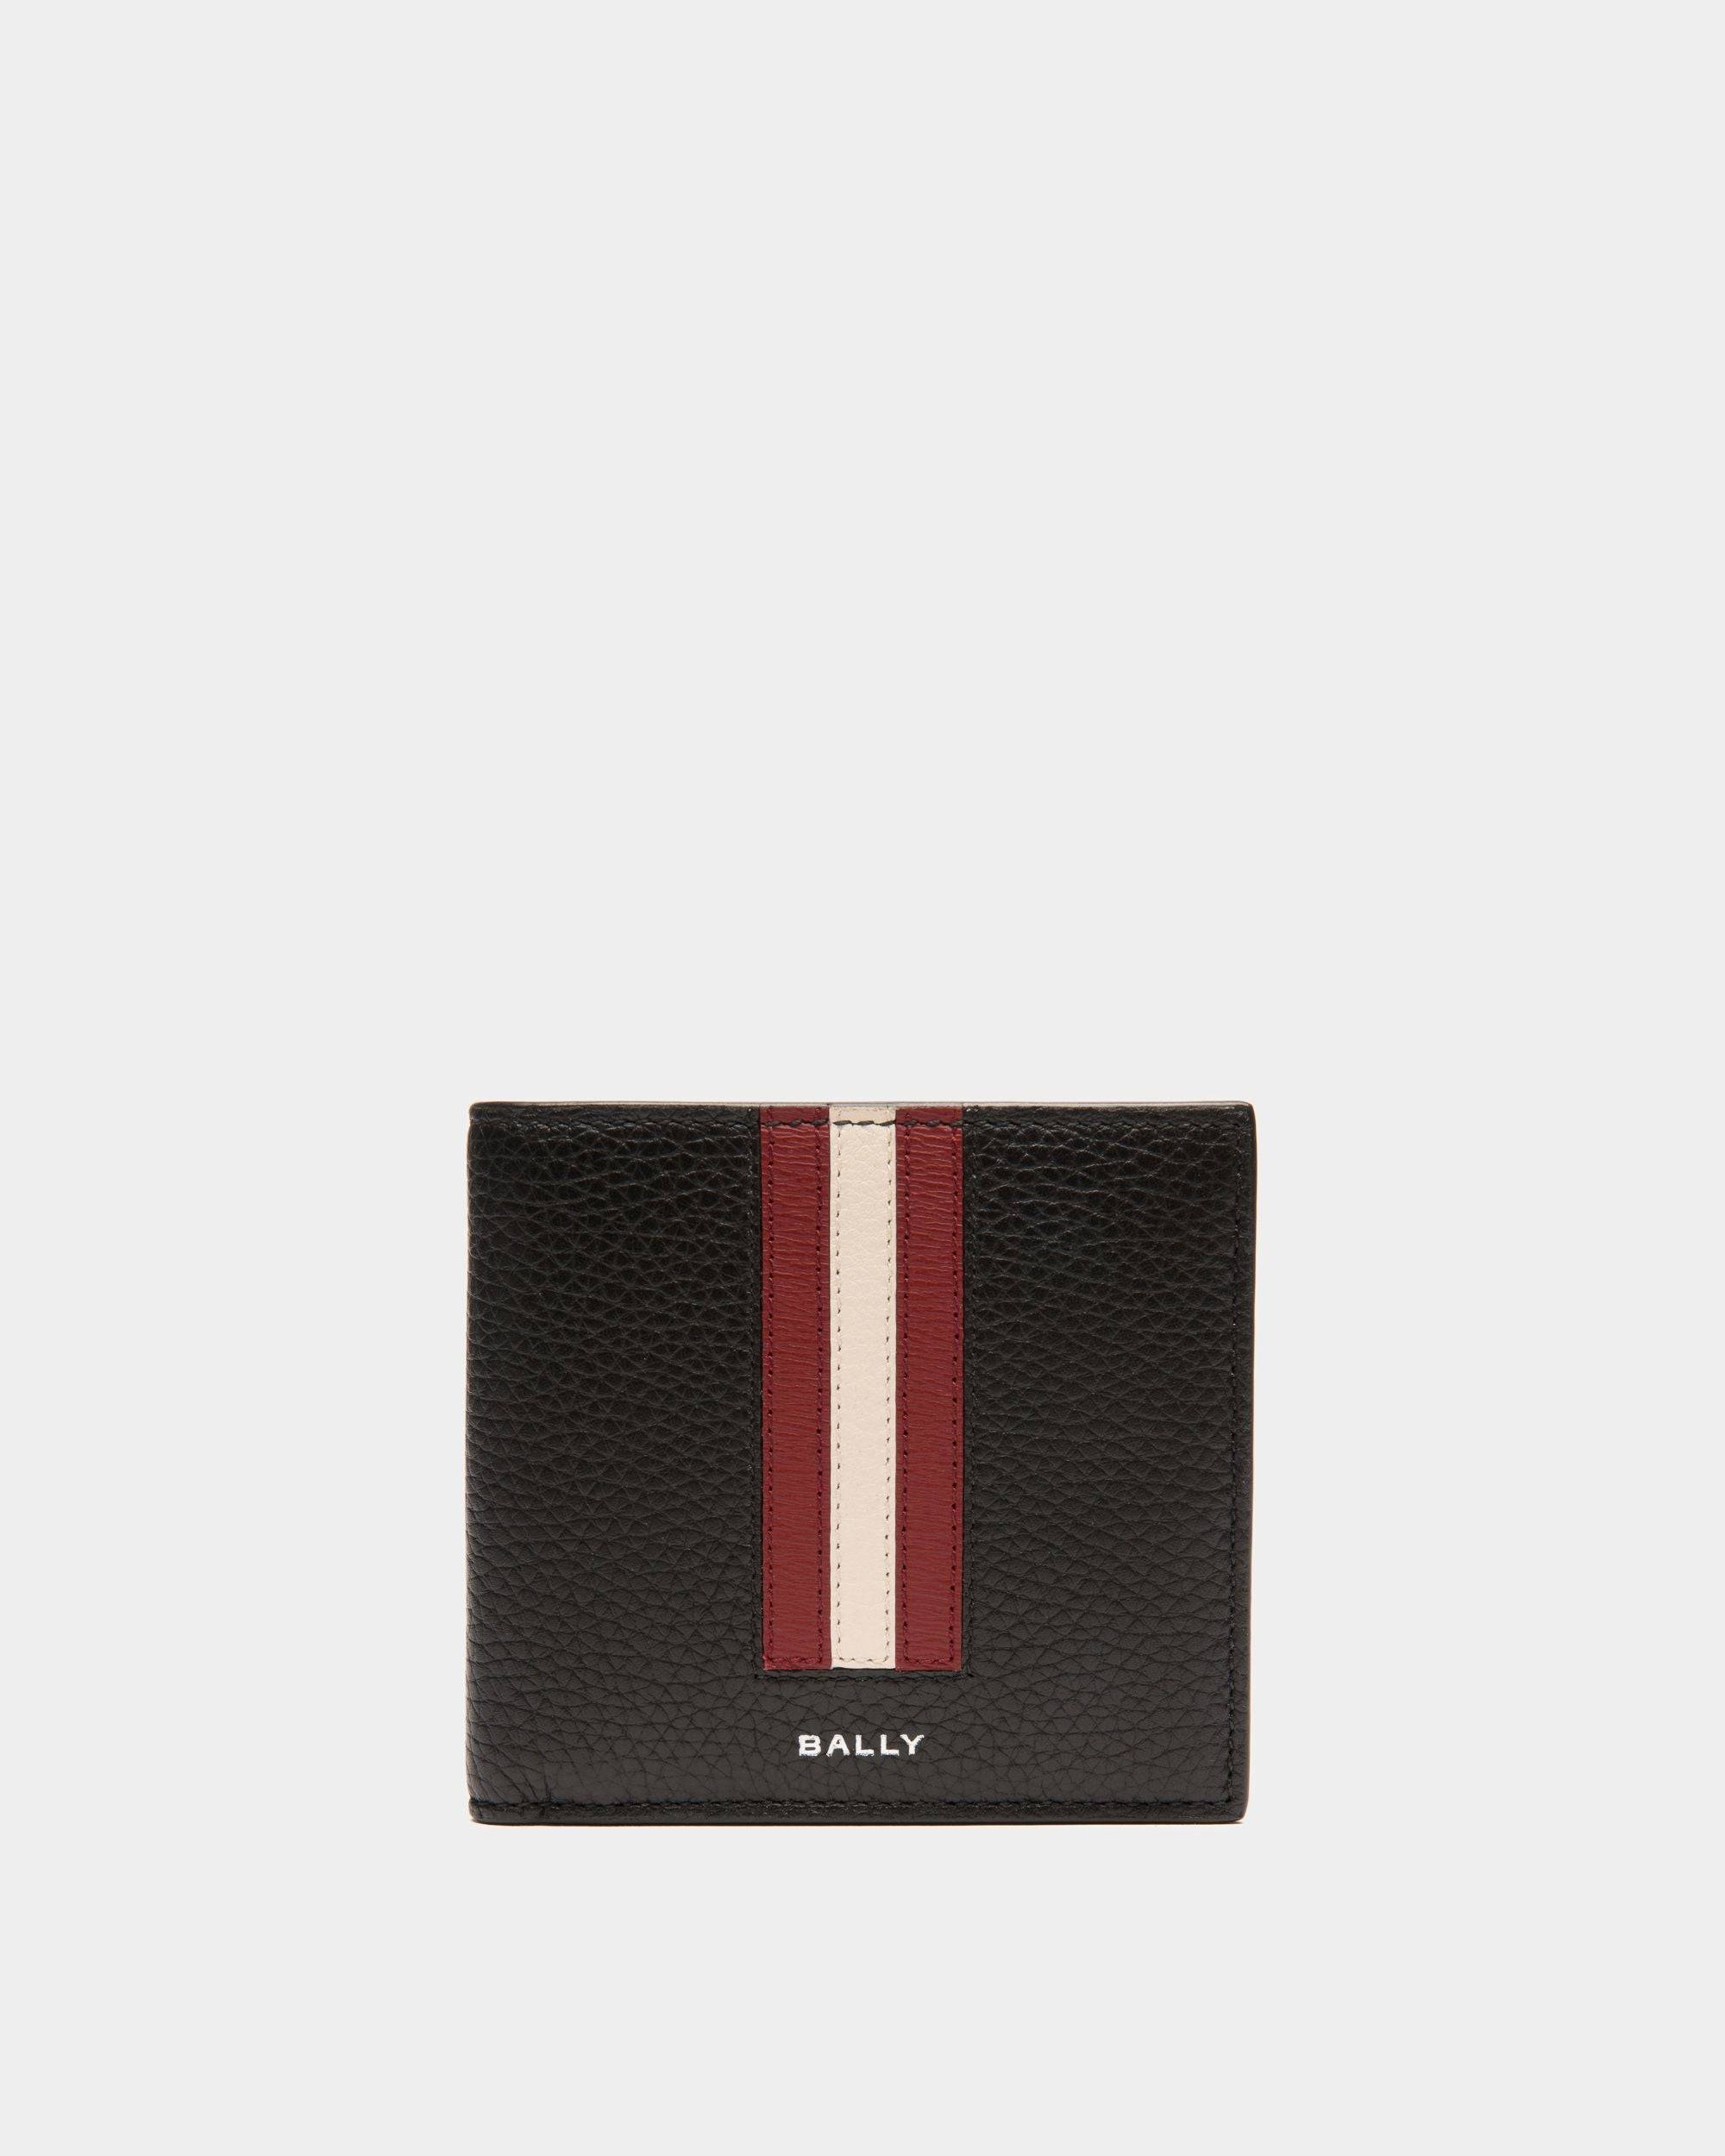 Men's Ribbon Bifold Wallet In Black Grained Leather | Bally | Still Life Front